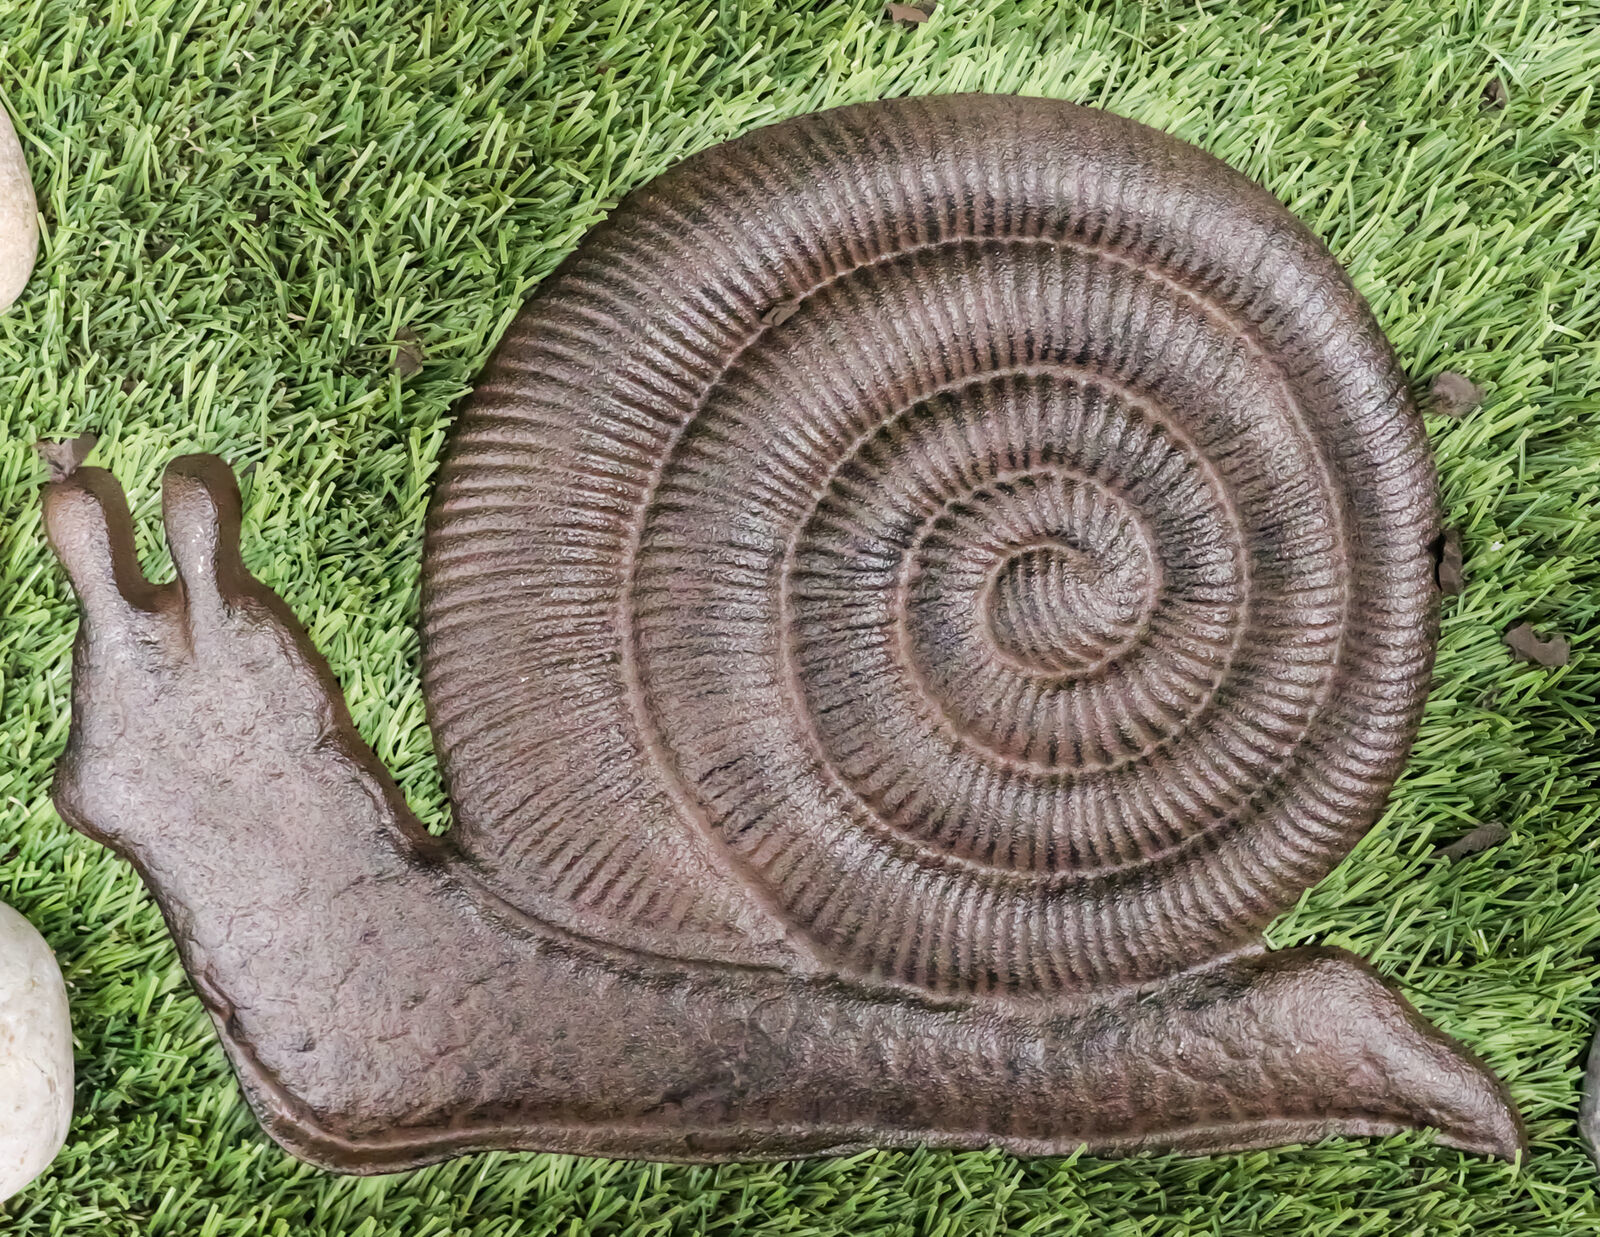 Cast Iron Rustic Textured Mollusk Snail Garden Stepping Stone Pave Foot Step - $39.99